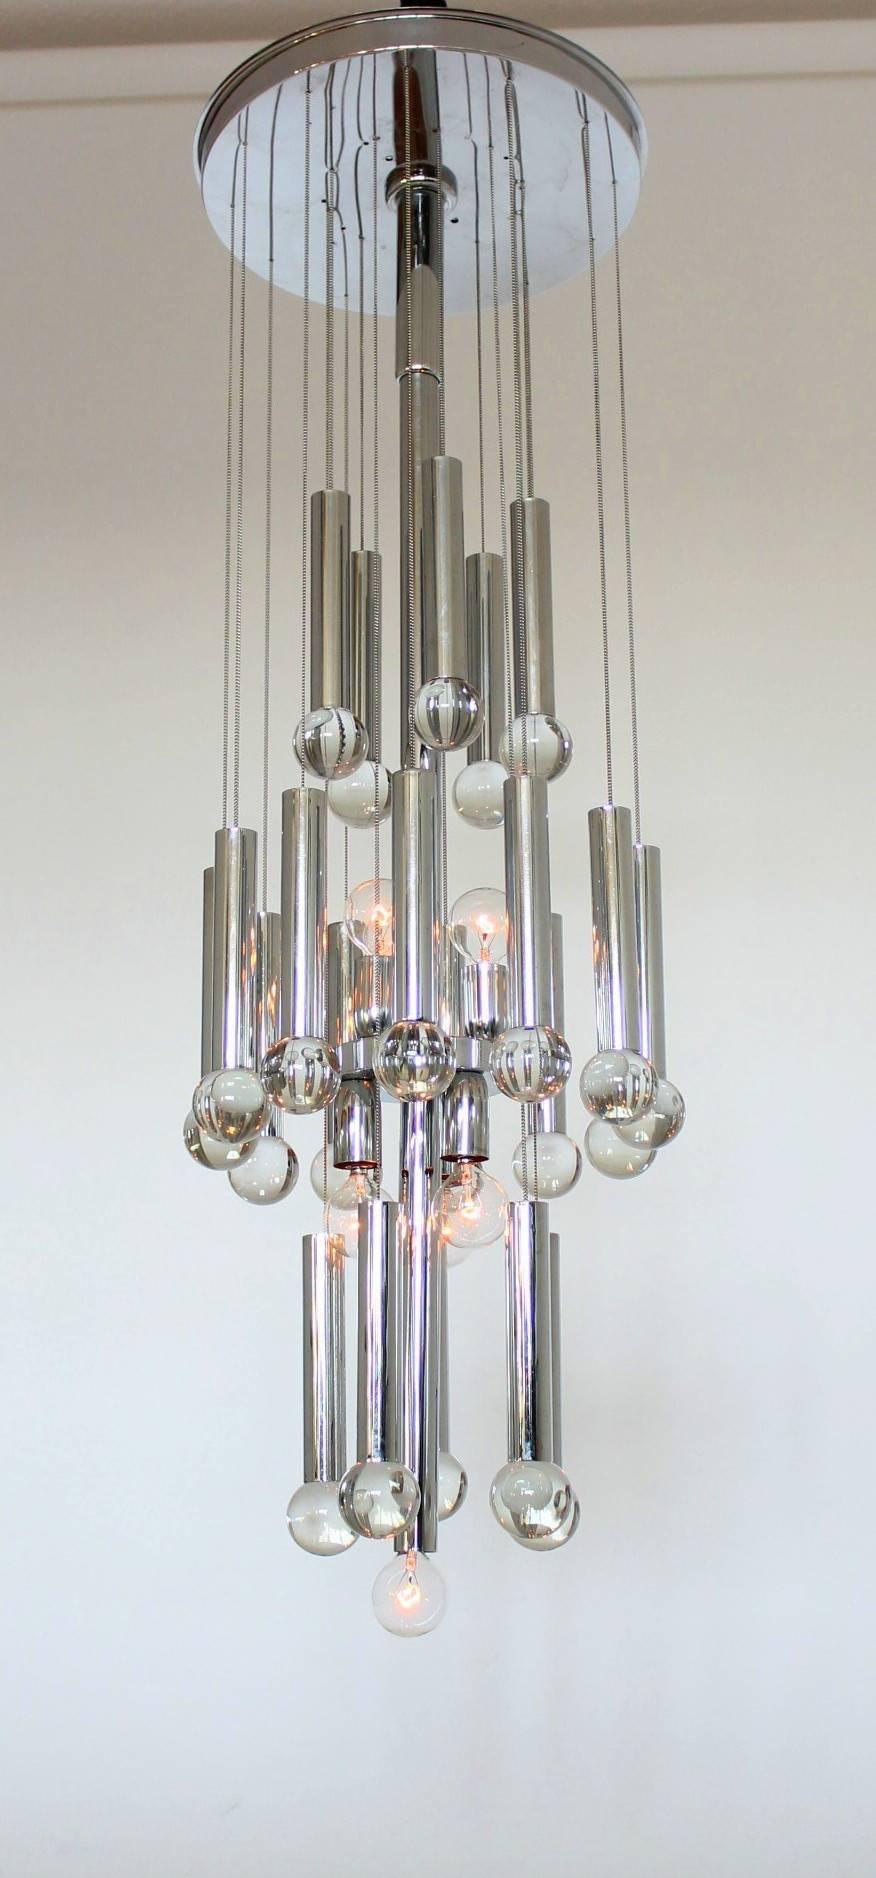 Modern elegance from the 1970s. 

The center stem contains five candelabra size sockets and is showed here with clear light bulb, blending in with the glass balls, creating a powerful explosion of reflection on the chrome tube while